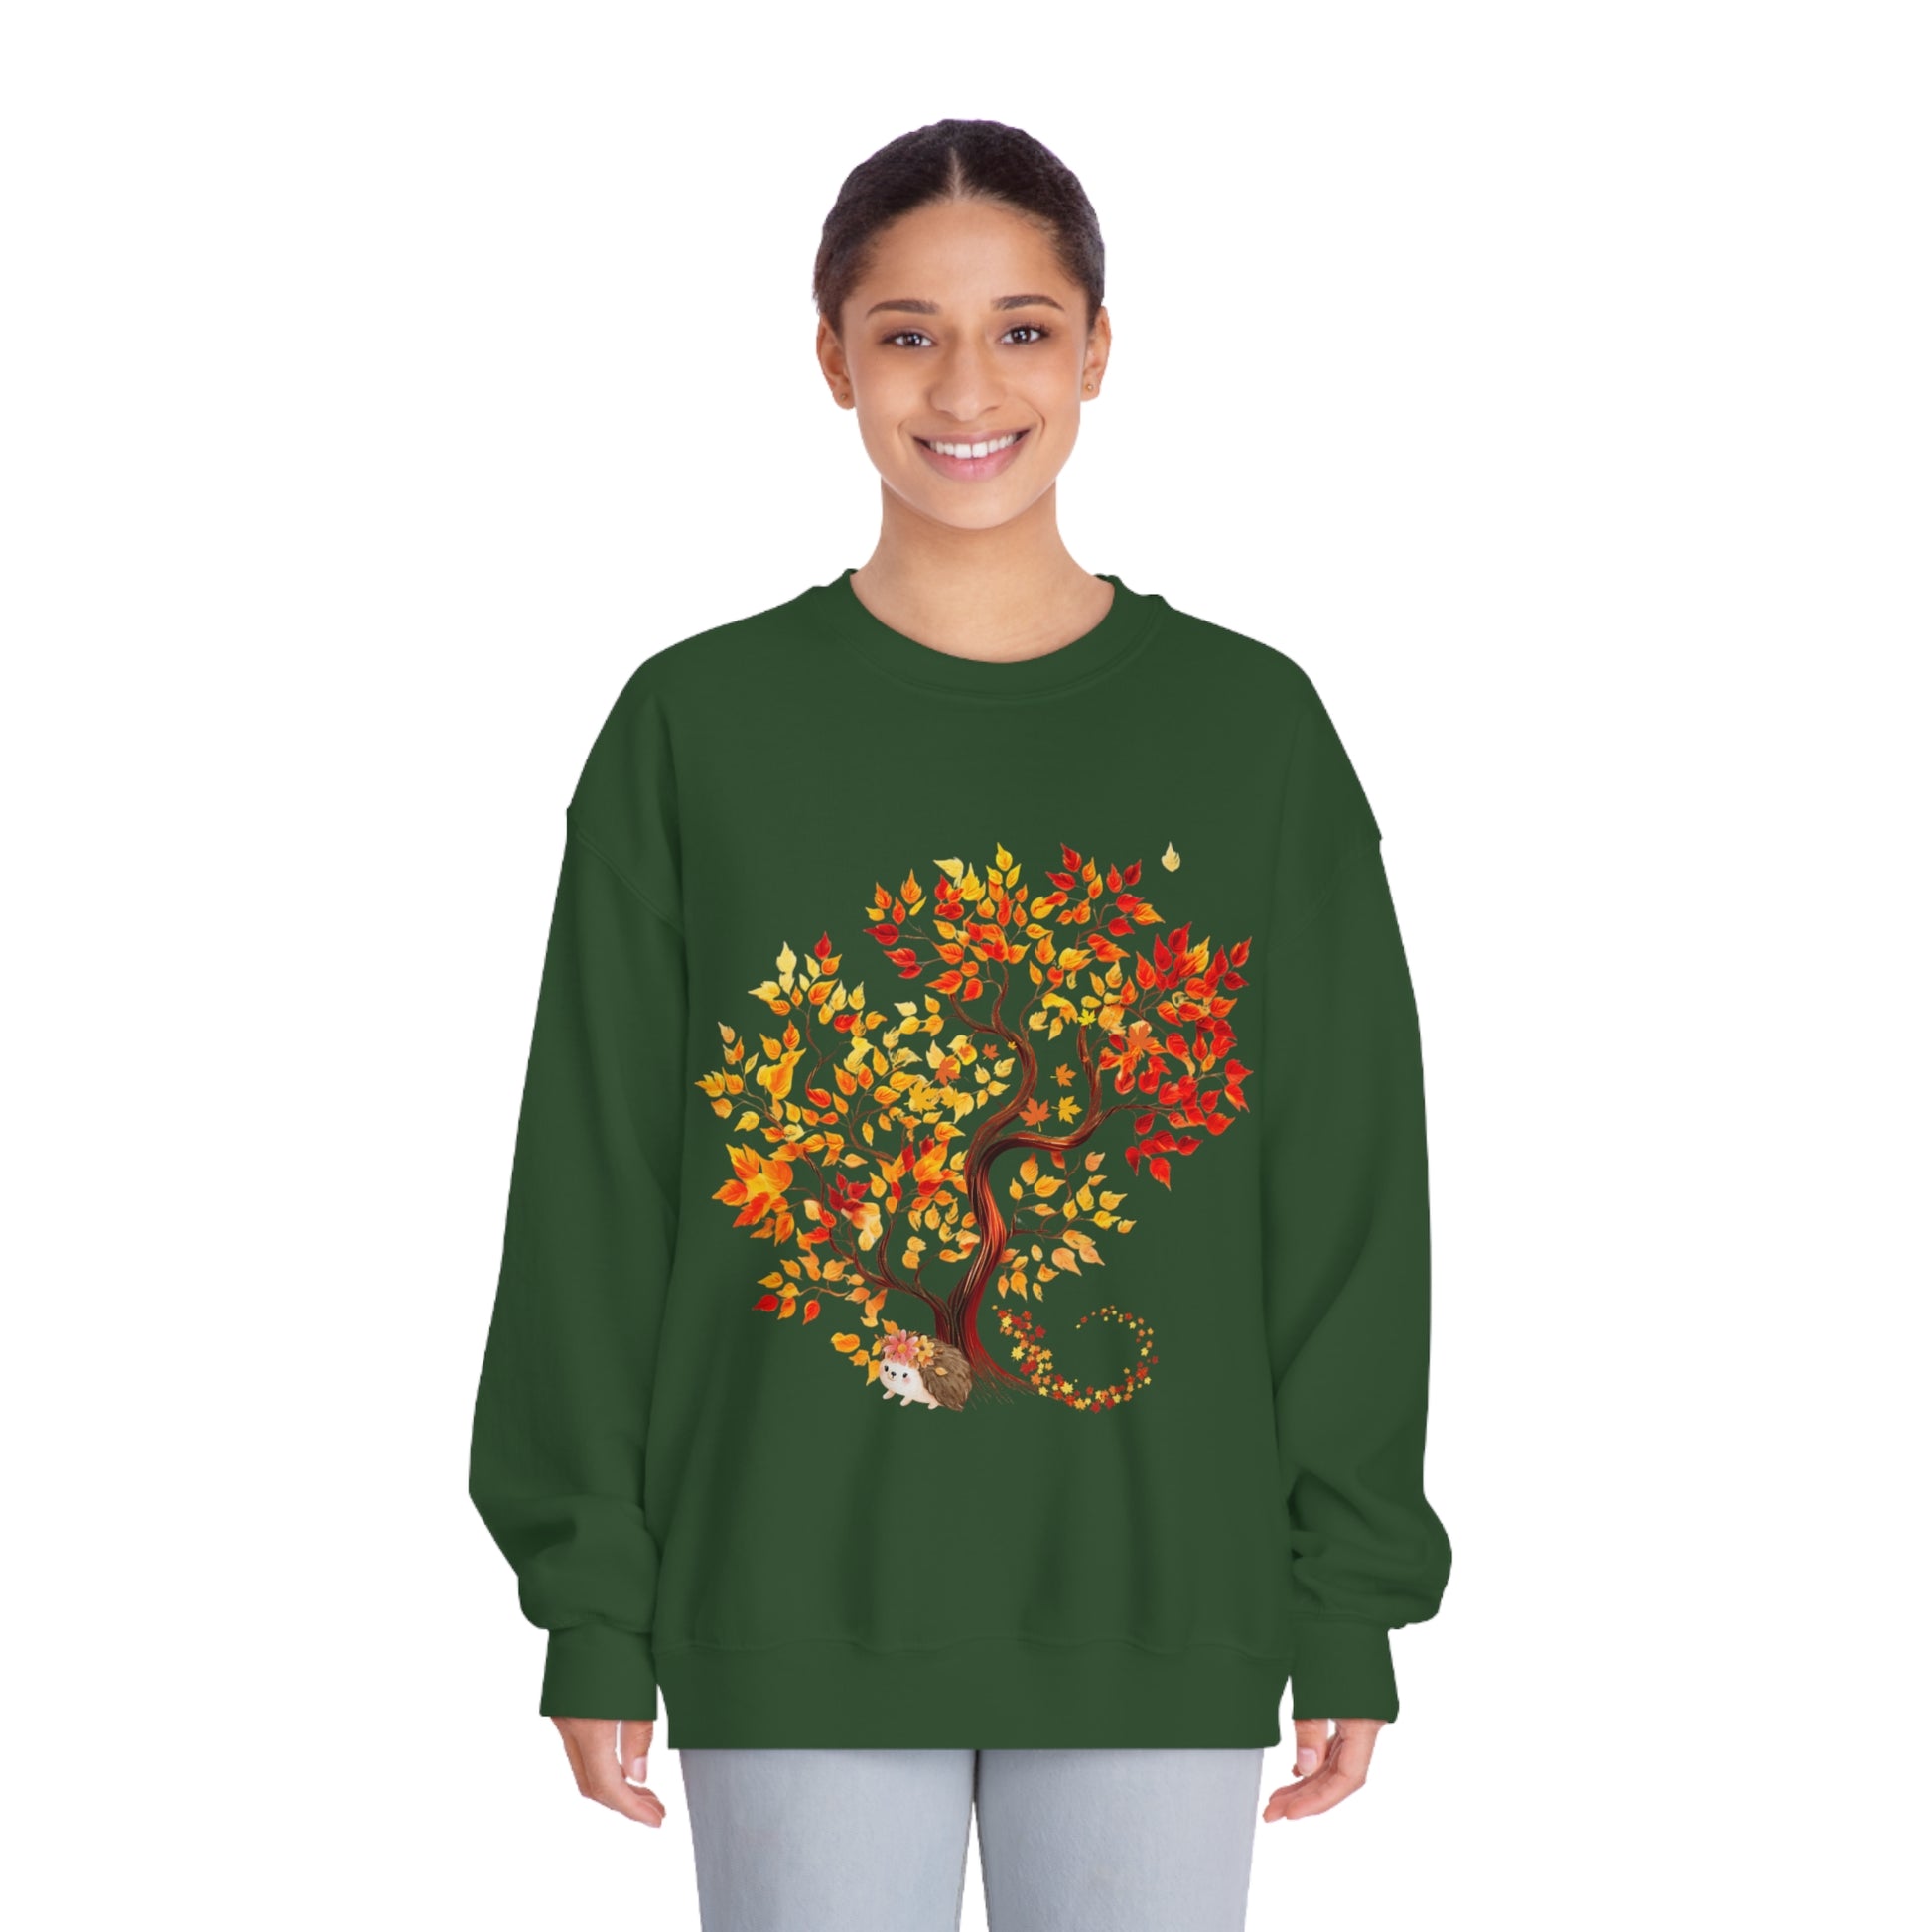 Autumn Tree Serenity Sweatshirt | Embrace the Tranquility of Fall Sweatshirt Forest Green S 